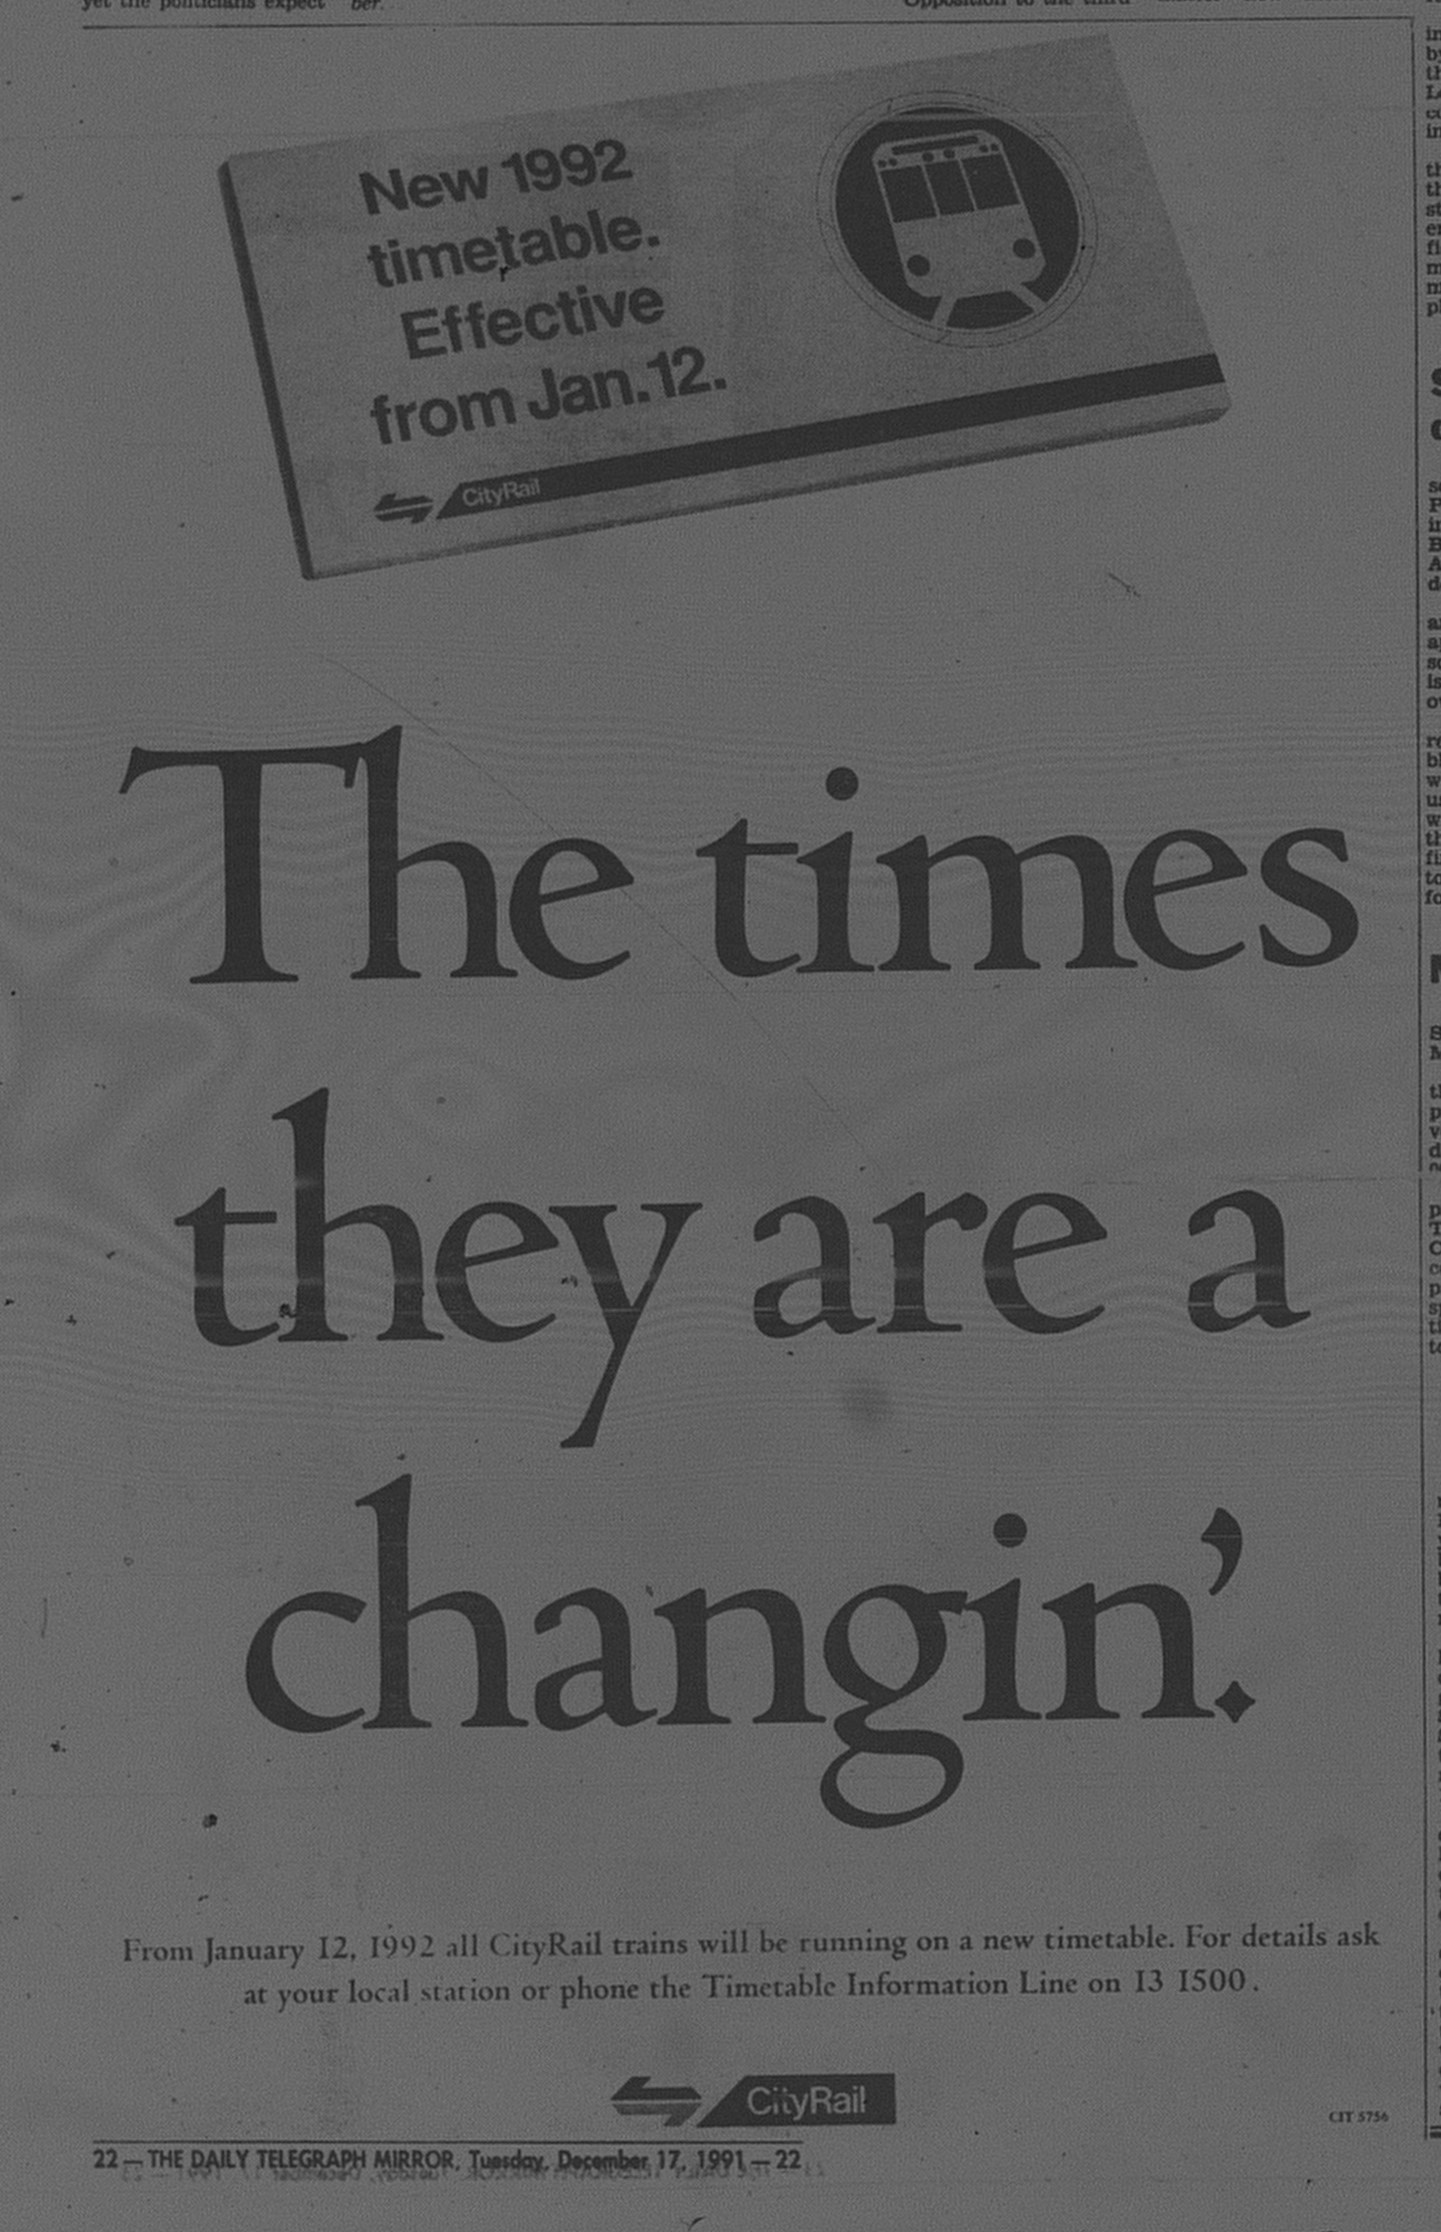 Cityrail 1992 Timetable Ad December 17 1991 daily telegraph 22